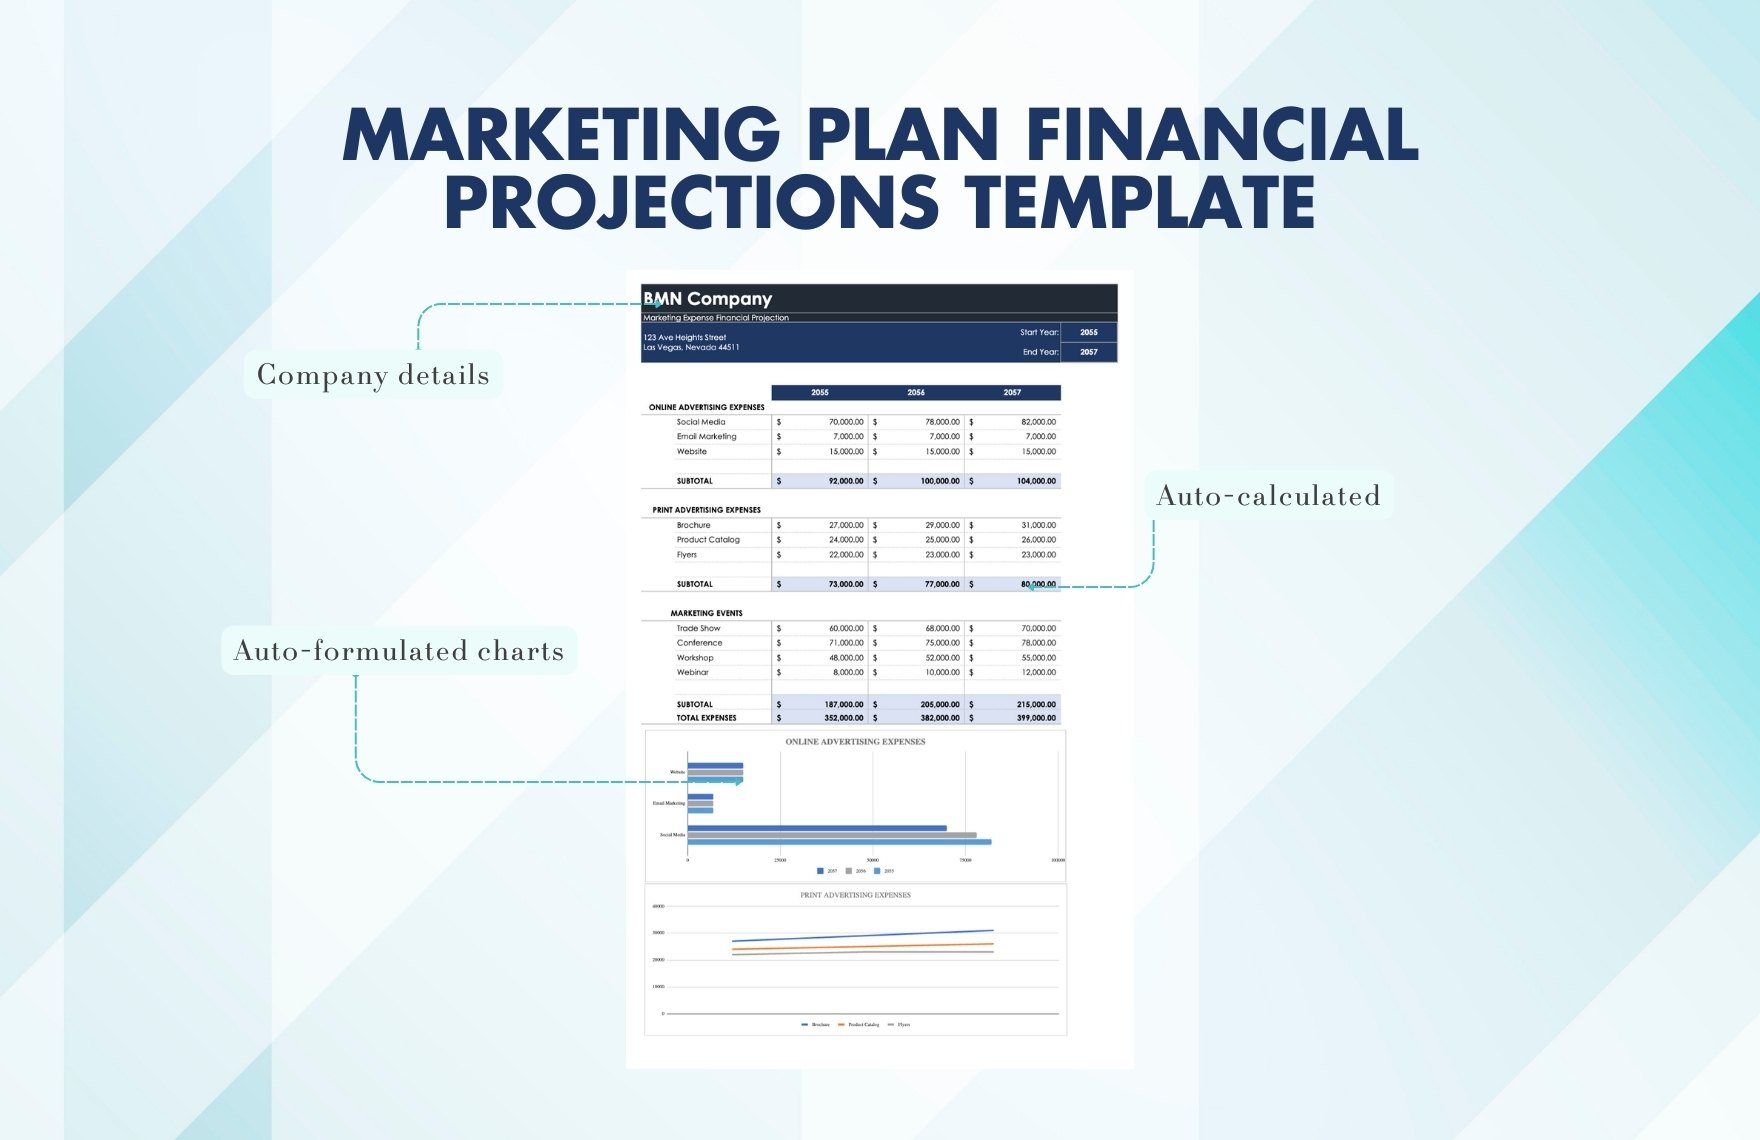 Marketing Plan Financial Projections Template